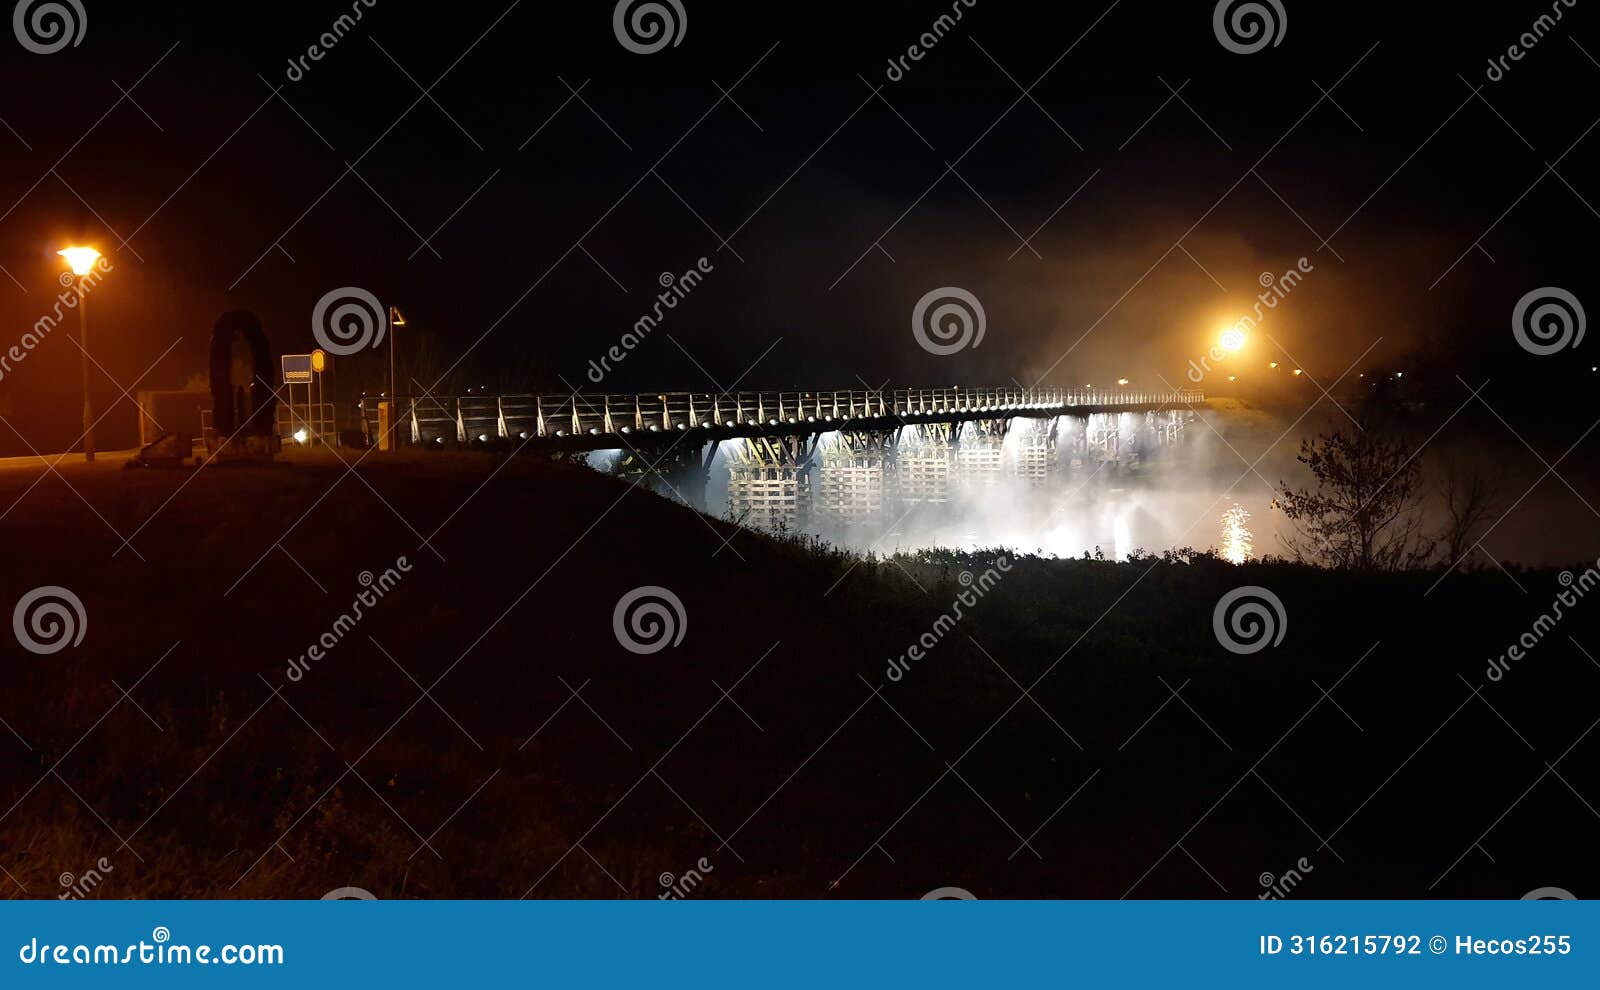 vintage old pedestrian wooden bridge with decorative modern led lights at night engulfed with thick fog and bright city lights